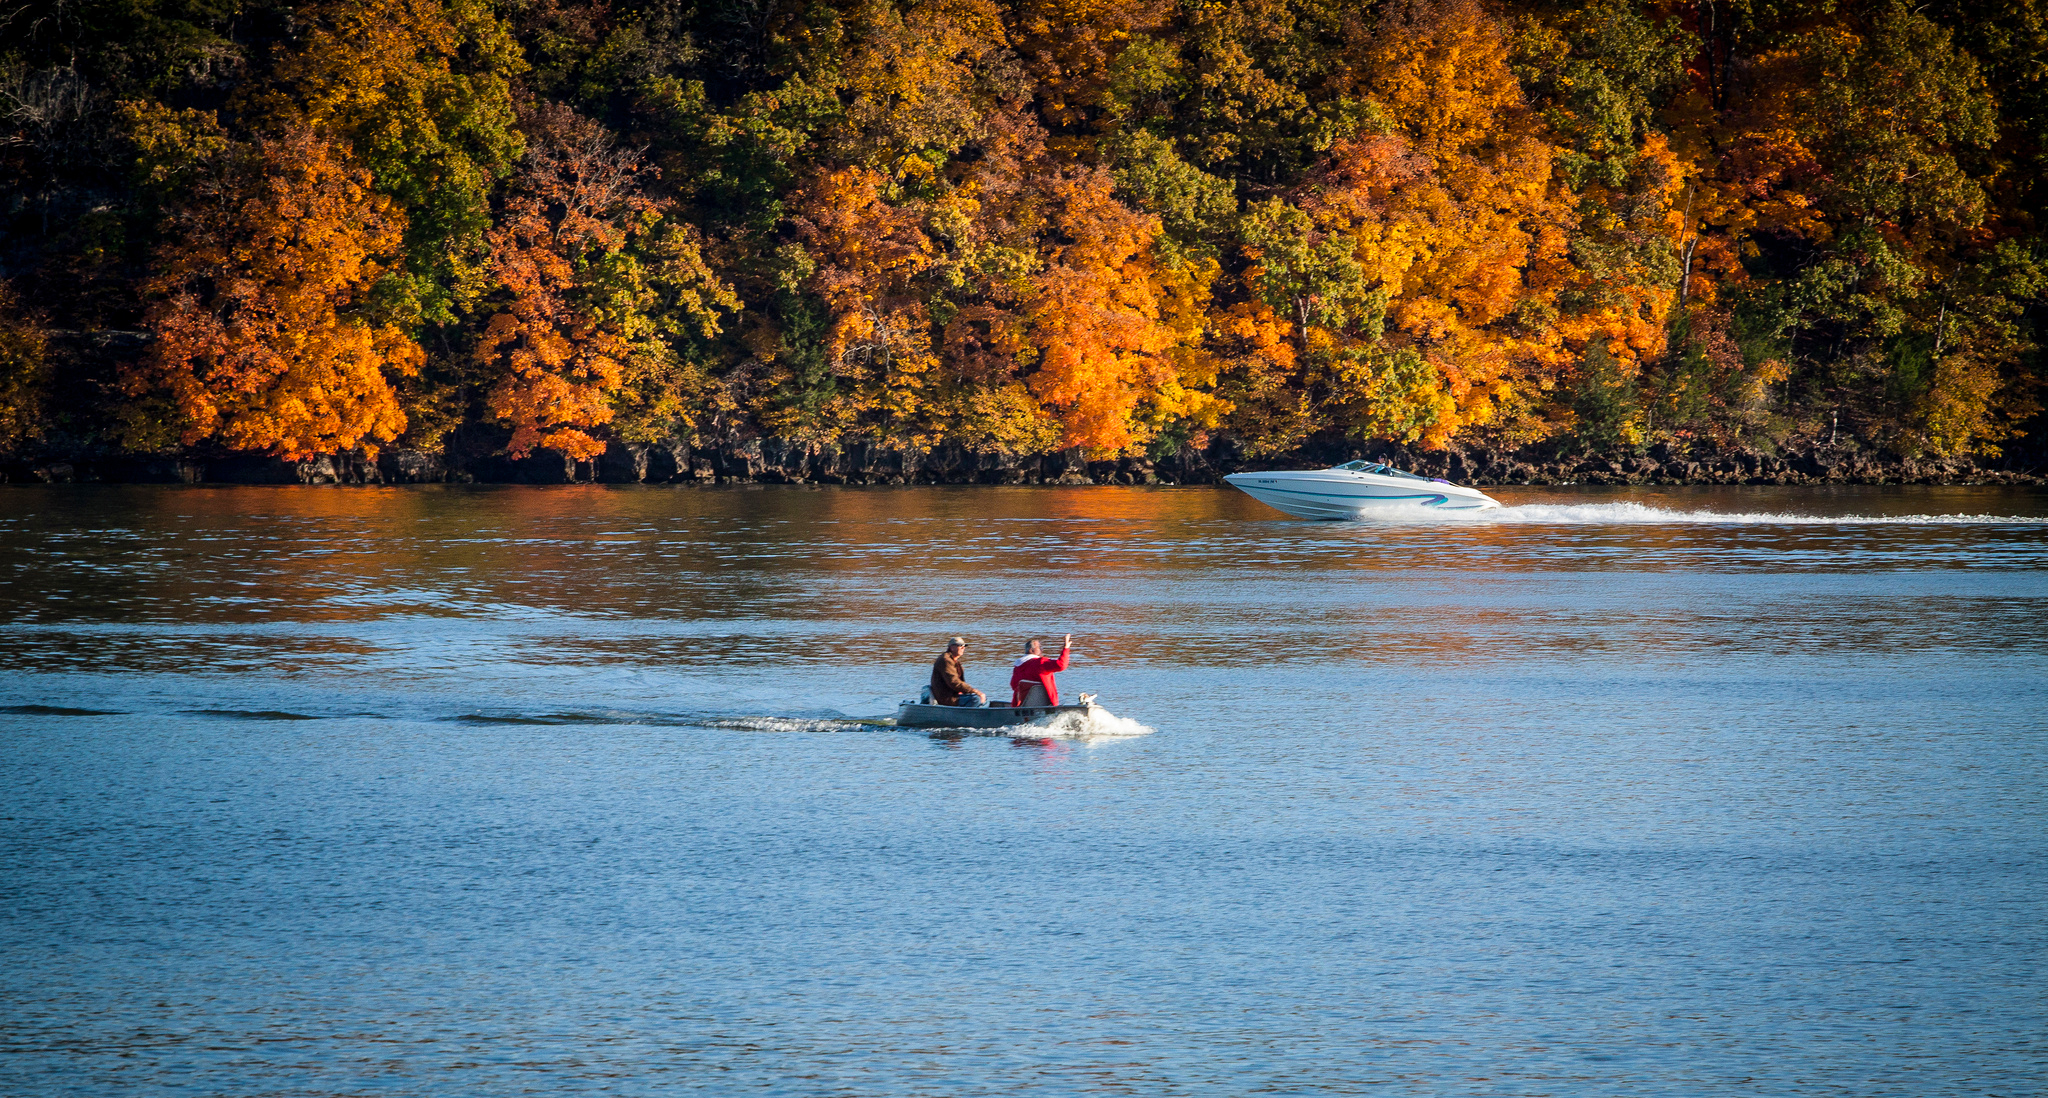 Weekend Drives: Lake of the Ozarks